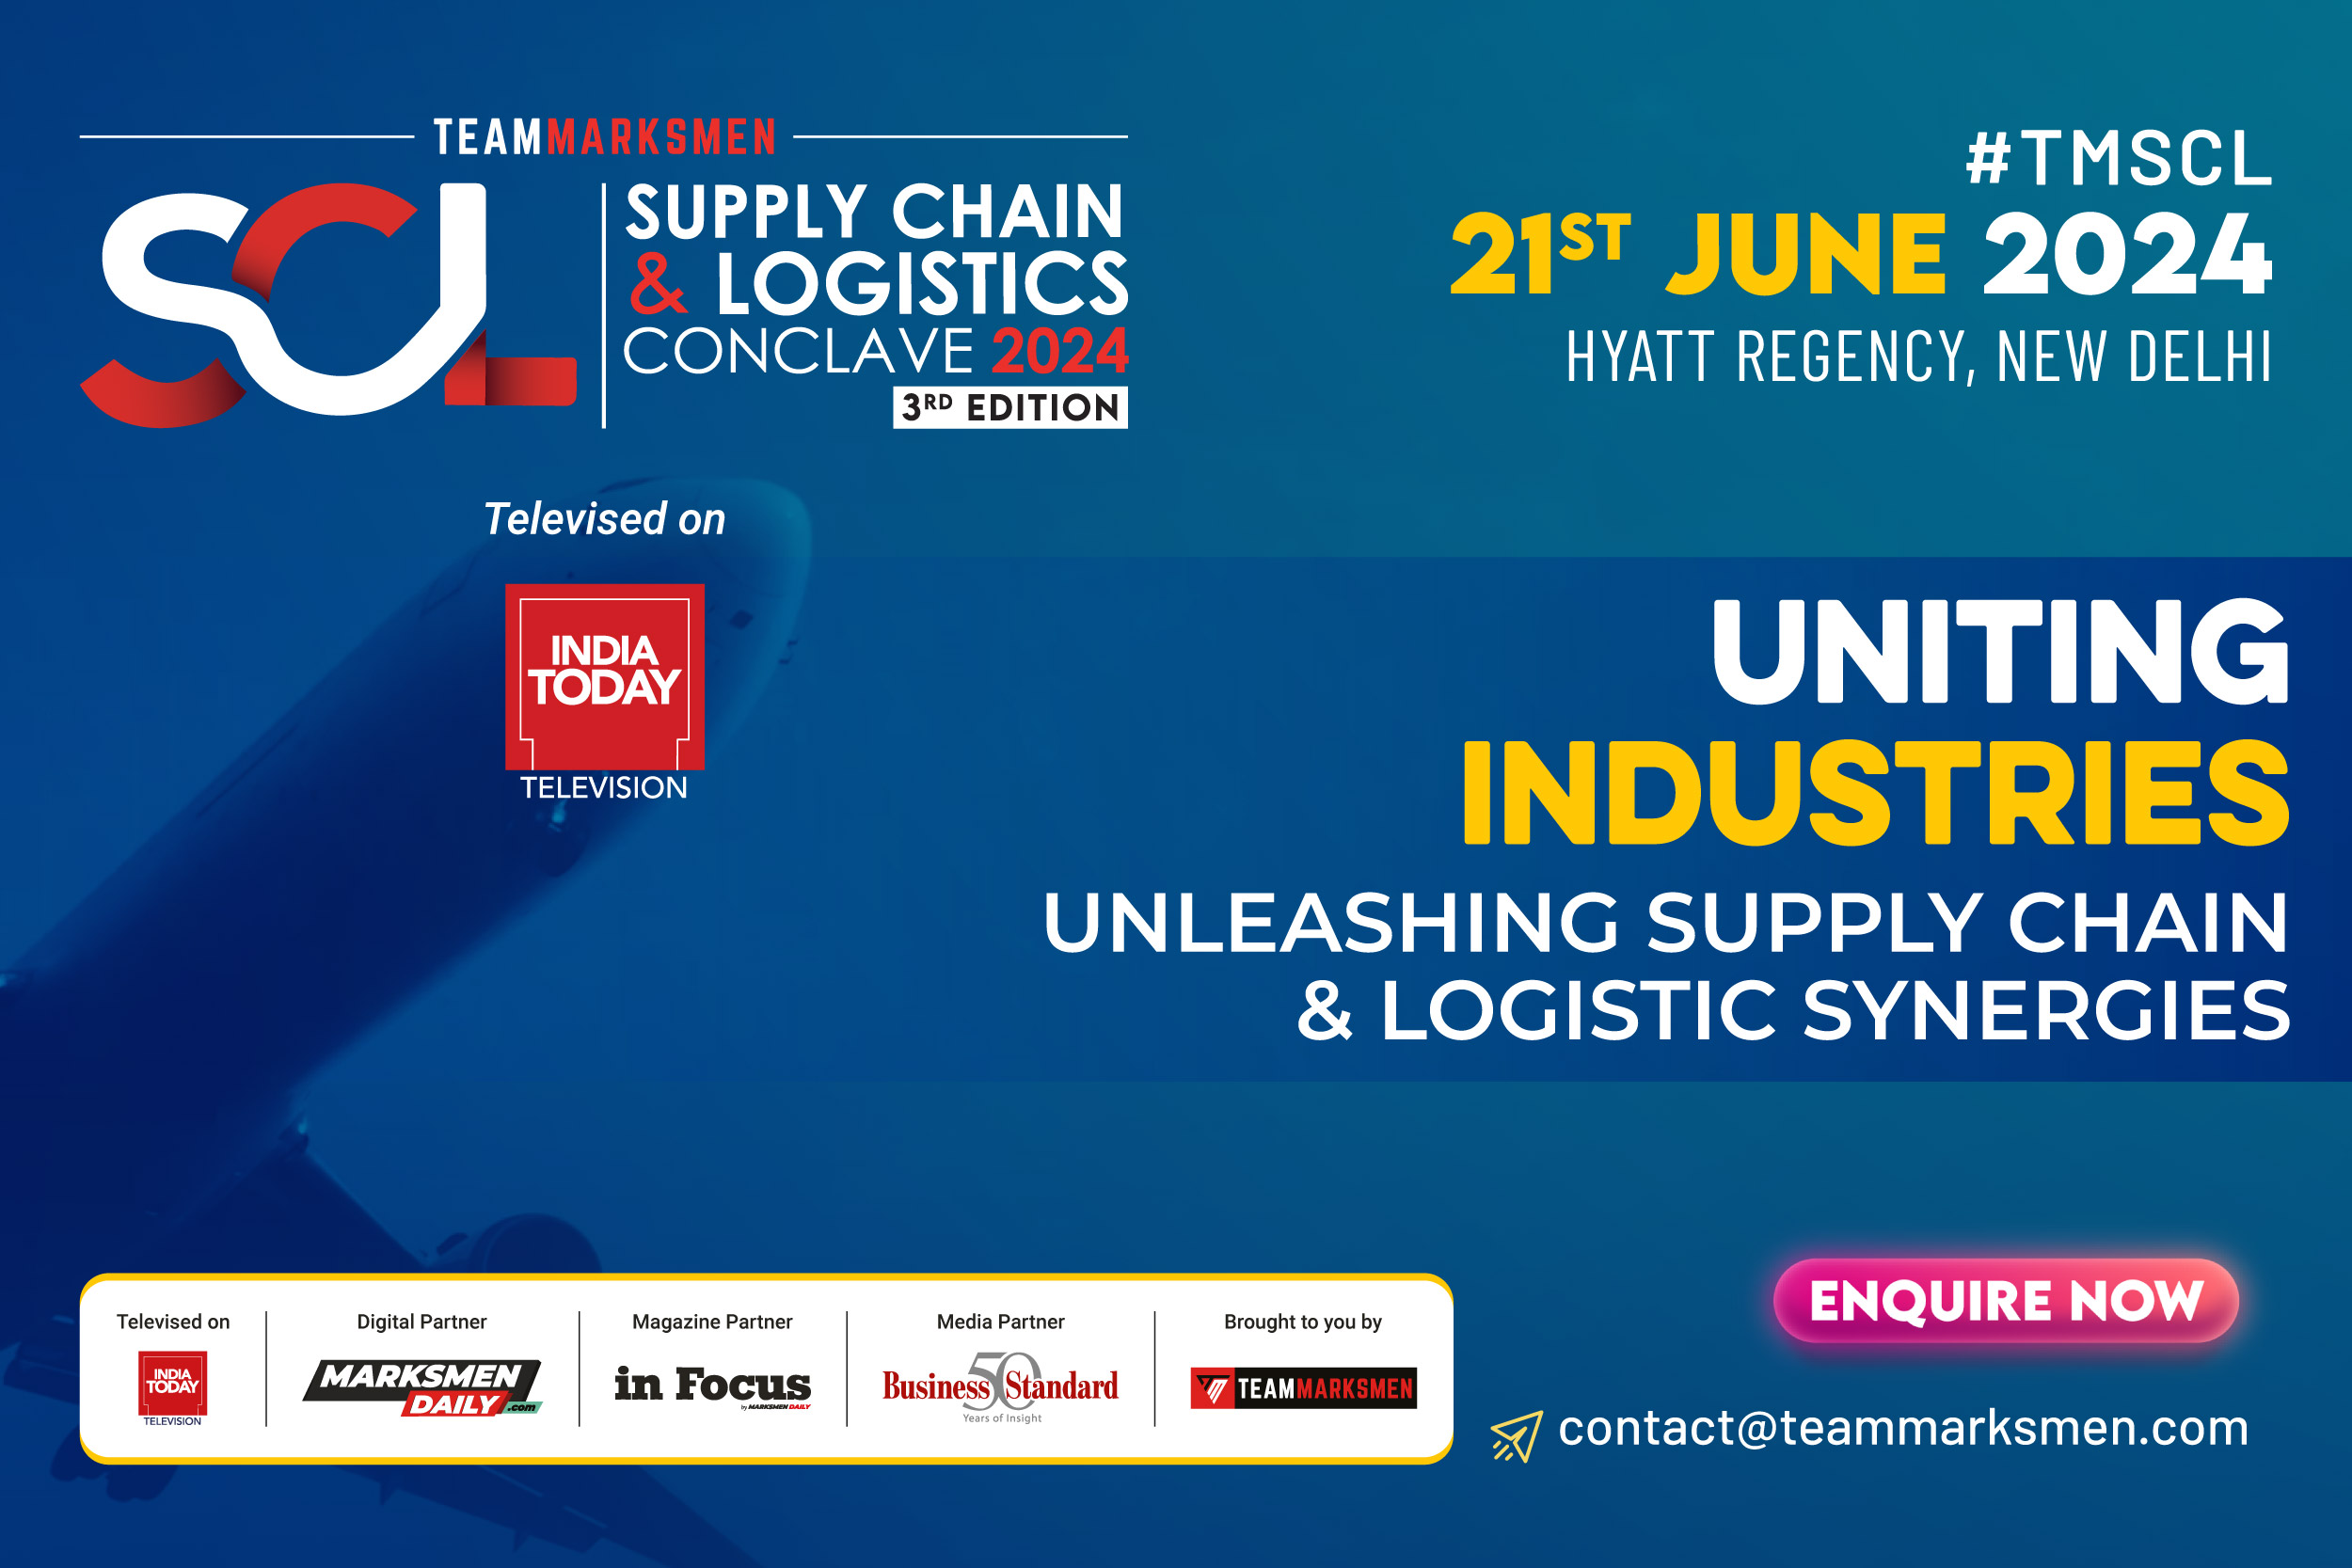 The 3rd Edition of Supply Chain & Logistics Conclave